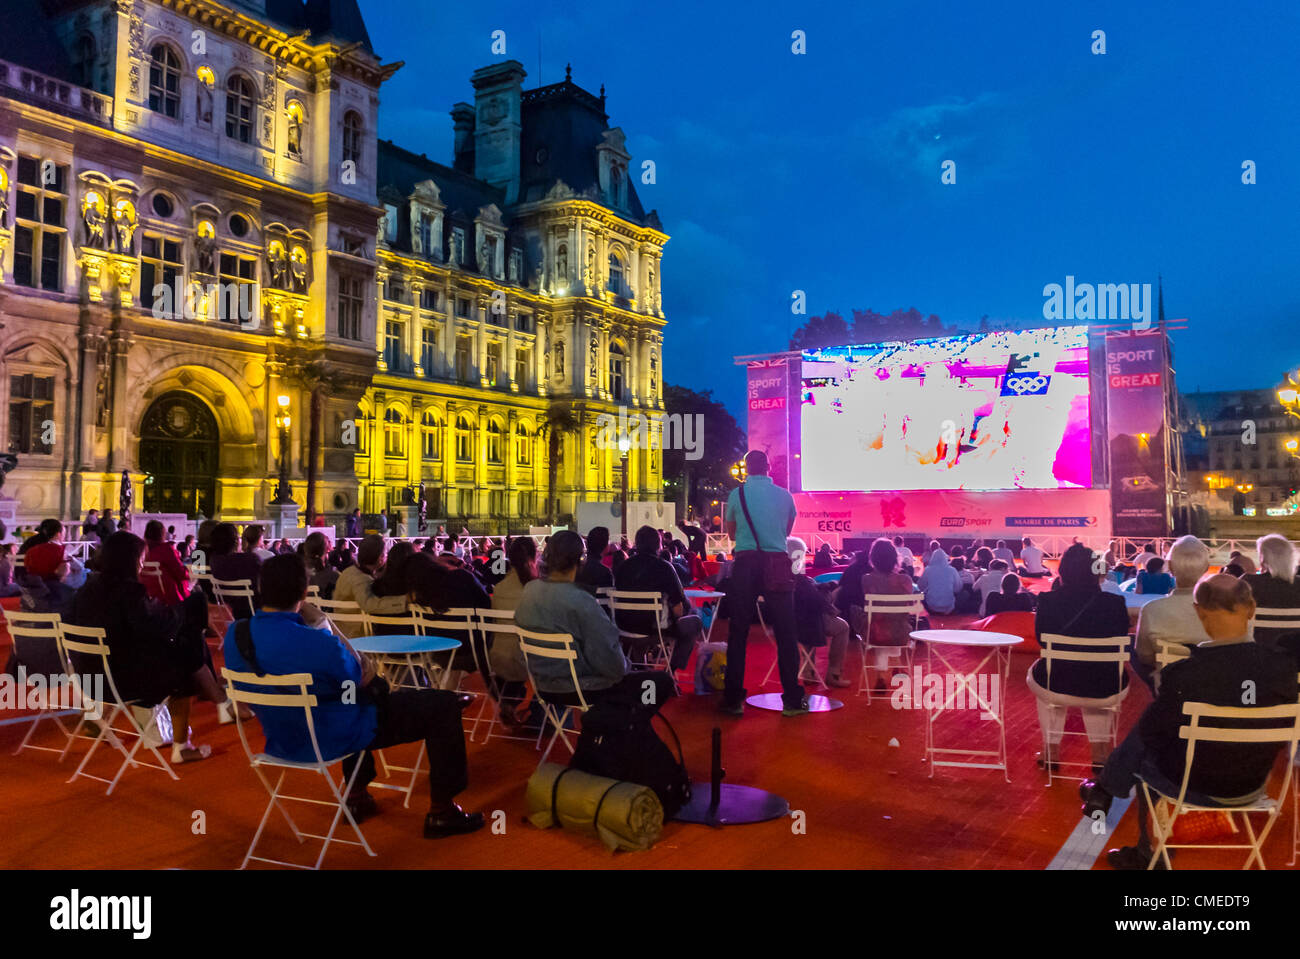 Paris, France - Large Crowd of People, Audience at Live Broadcast on Public Screen, 'Paris Plages' Outdoor Screen, Summer Sports Events, Stock Photo